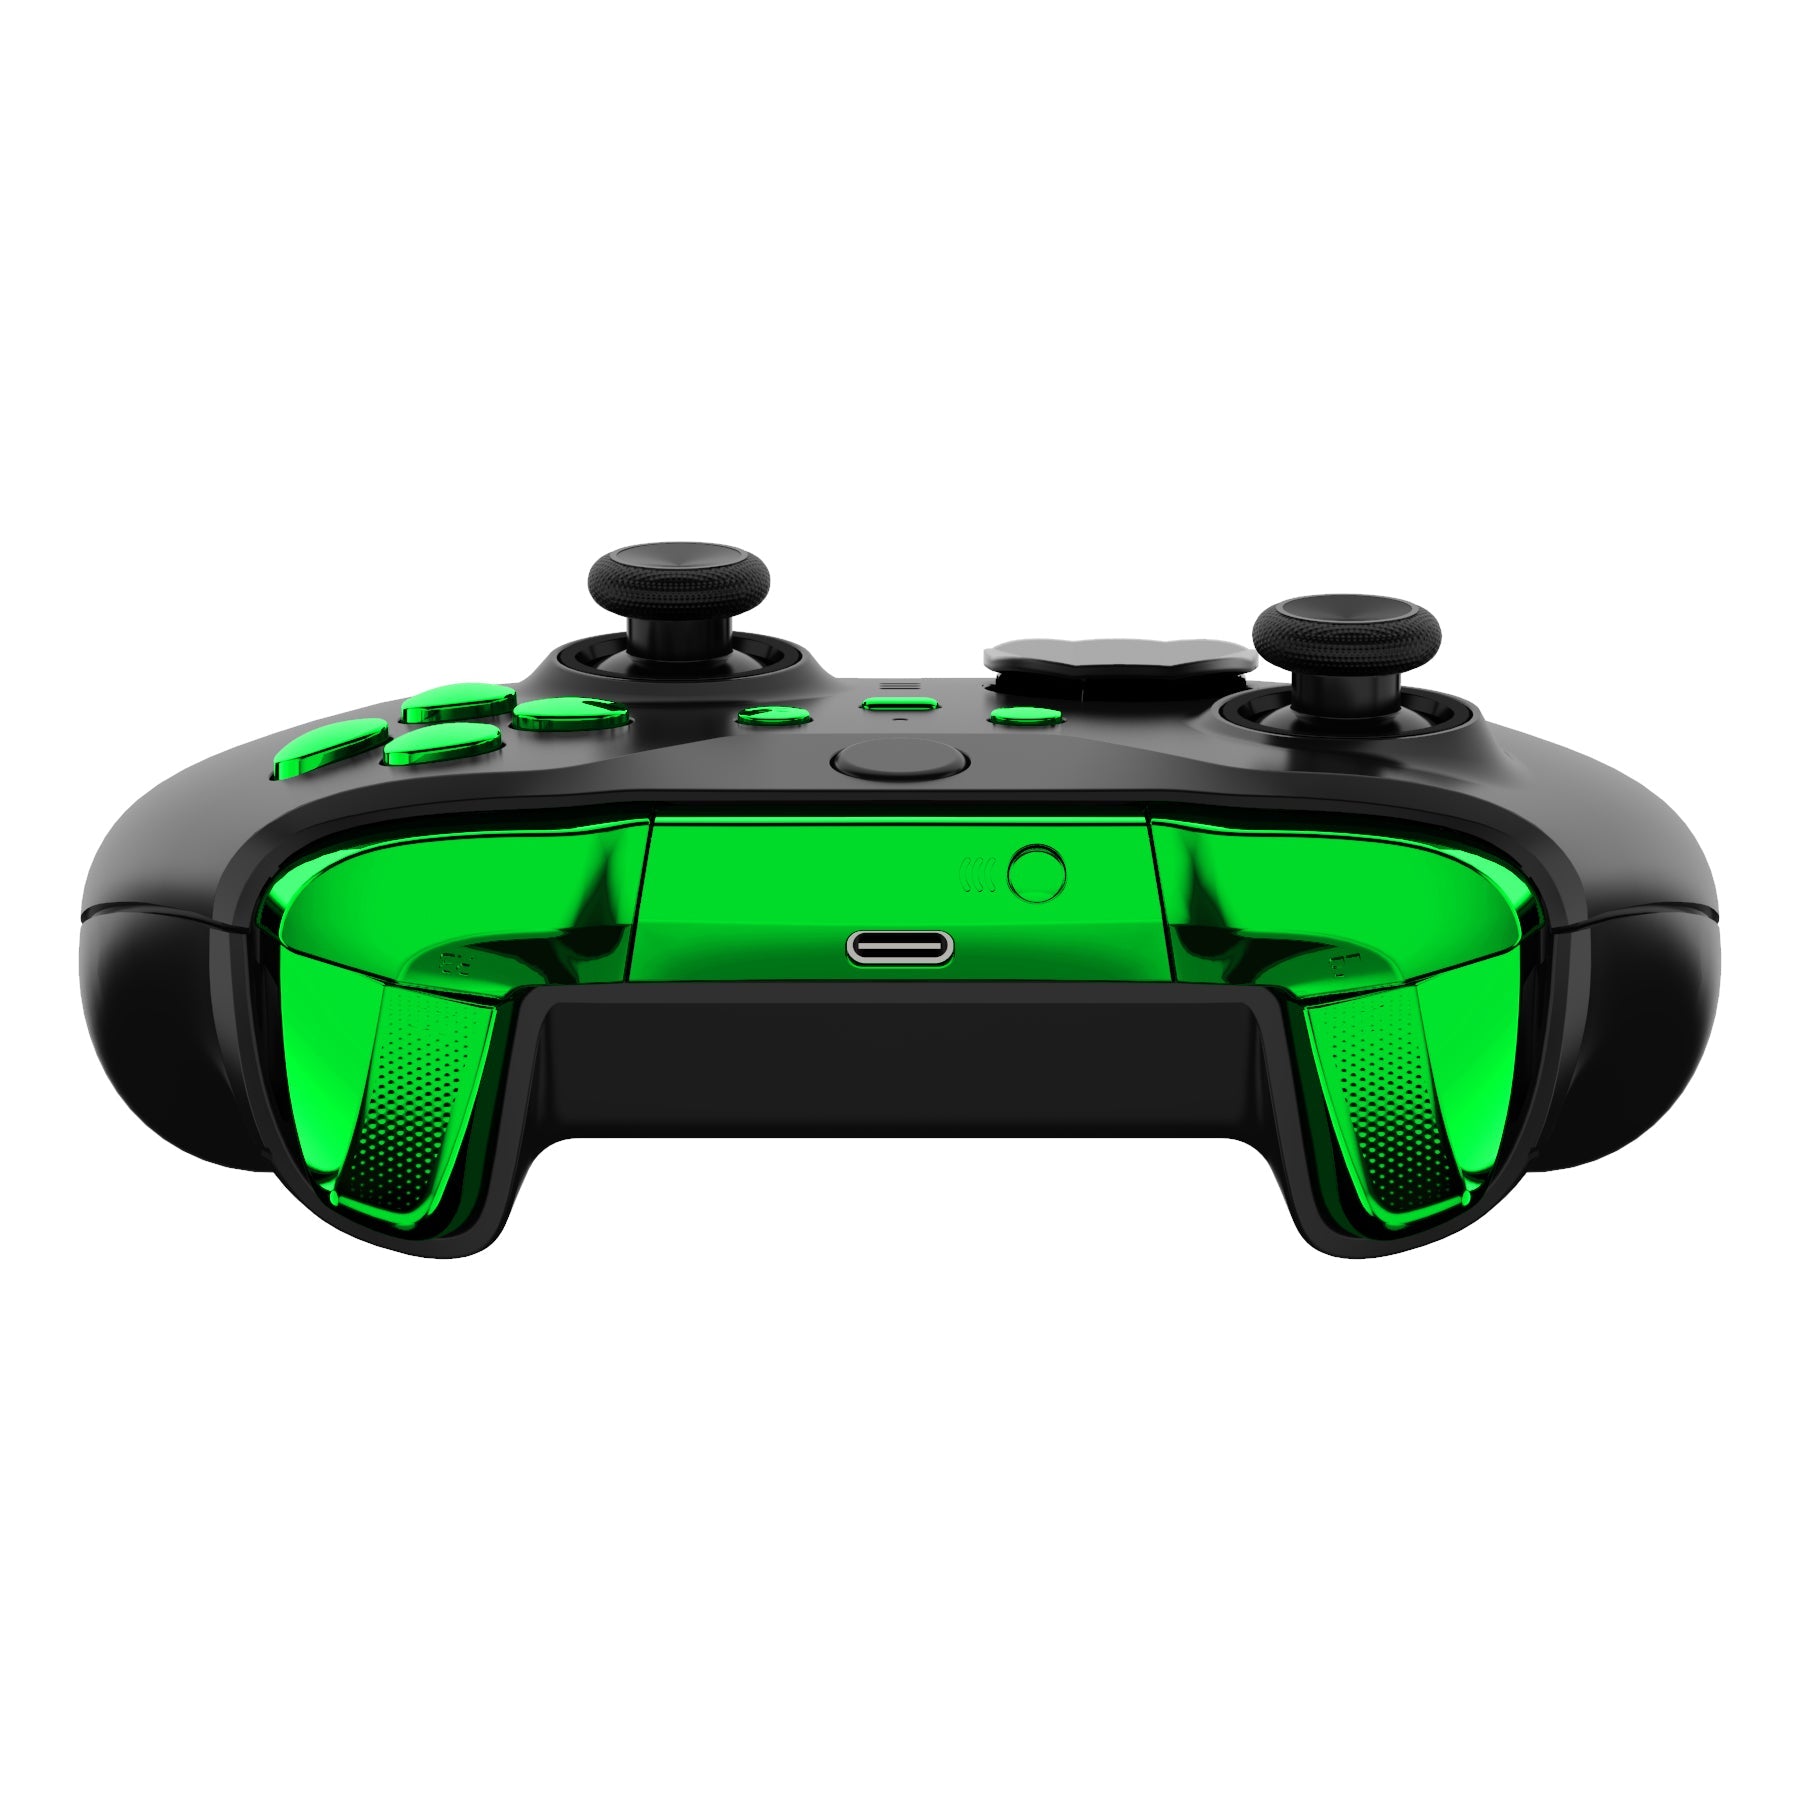 eXtremeRate Retail Chrome Green Replacement Buttons for Xbox One Elite Series 2 Controller, LB RB LT RT Bumpers Triggers ABXY Start Back Sync Profile Switch Keys for Xbox One Elite V2 Controller (Model 1797 and Core Model 1797) - IL206